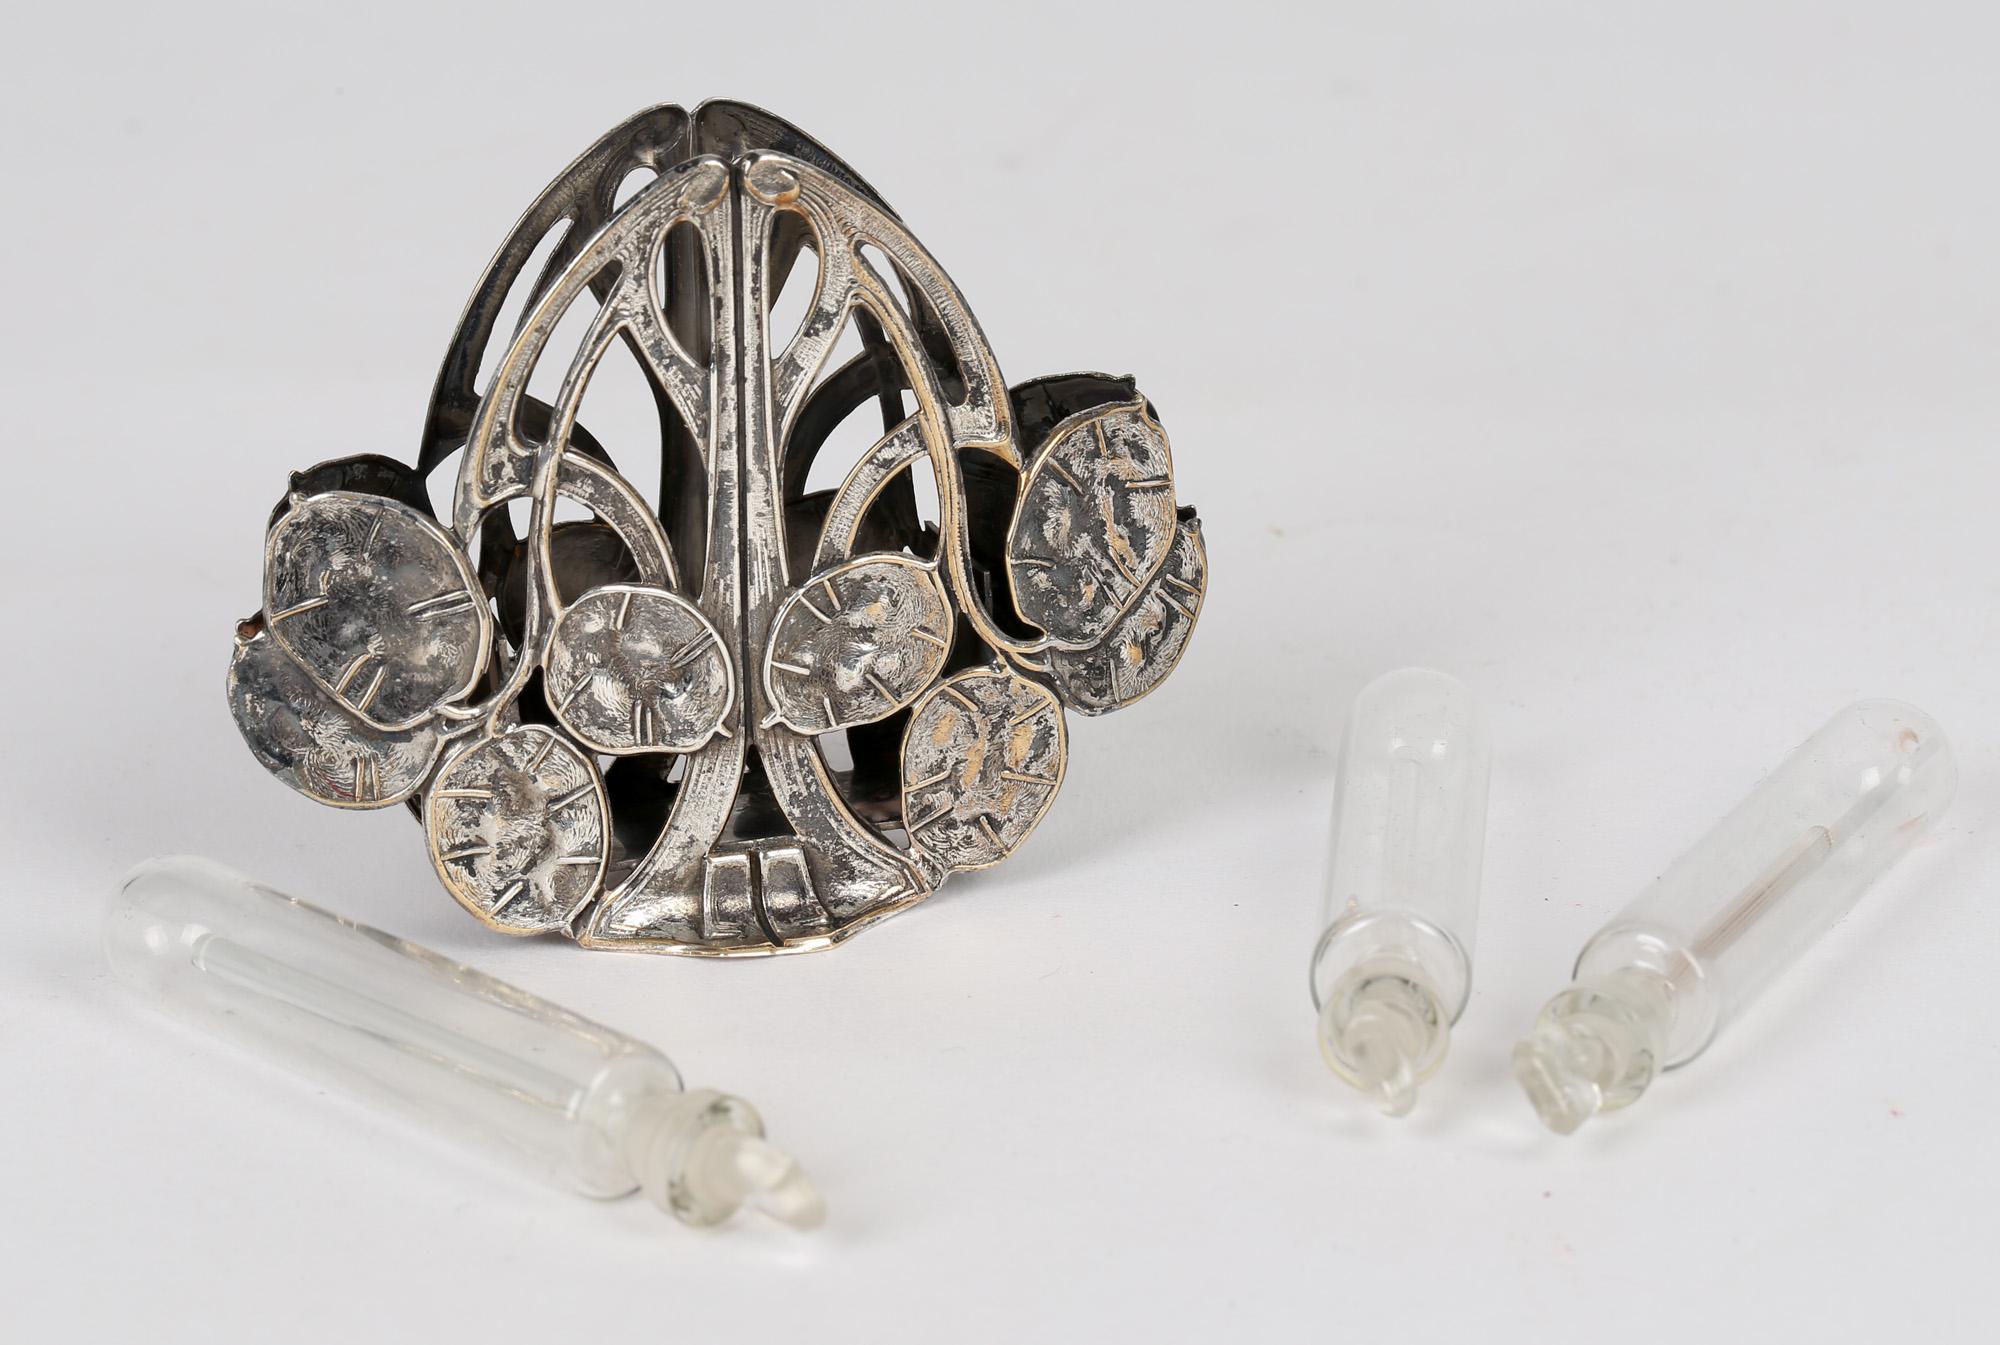 A very stylish Continental Art Nouveau silver plated seed pod scent bottle holder with three scent bottles dating from around 1900. The holder is formed from a series of seed pod designs on raised trailing stems with openwork designs with a small